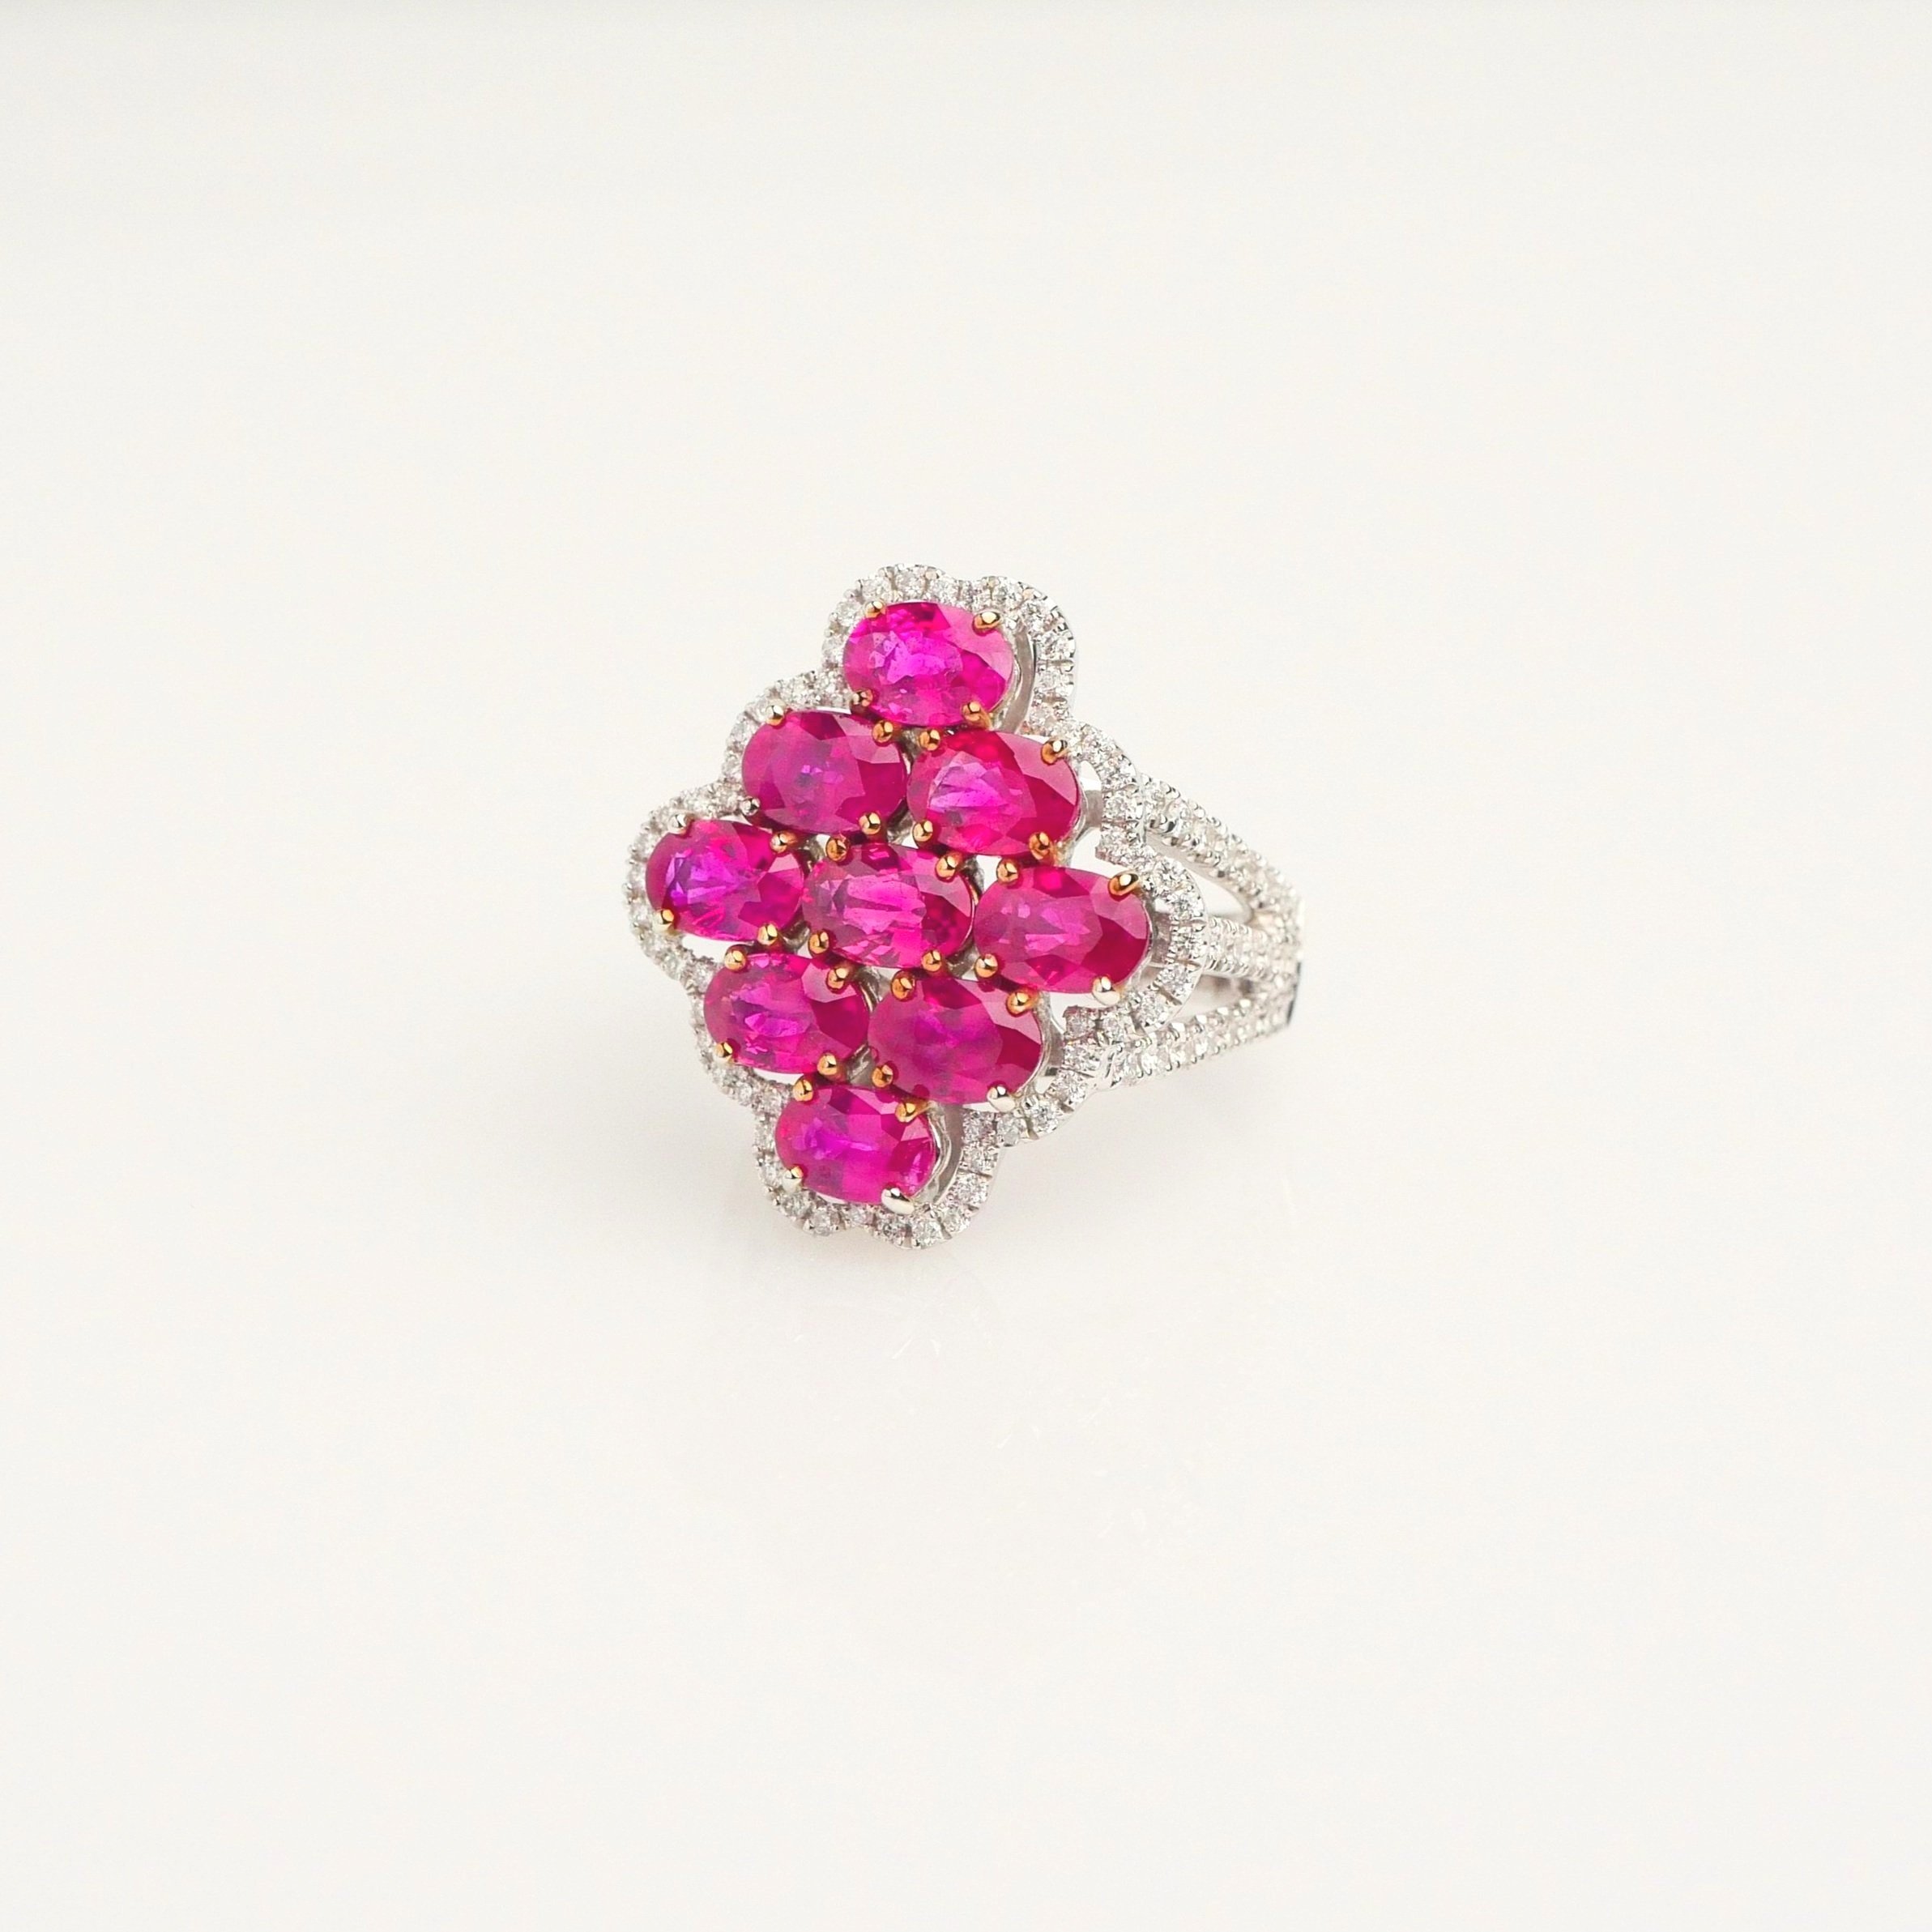  RUBY AND DIAMOND RING - R0781  9 RUBY TW 5.90 CARATS  RB DIA TW 1.09 CARATS  18KW 